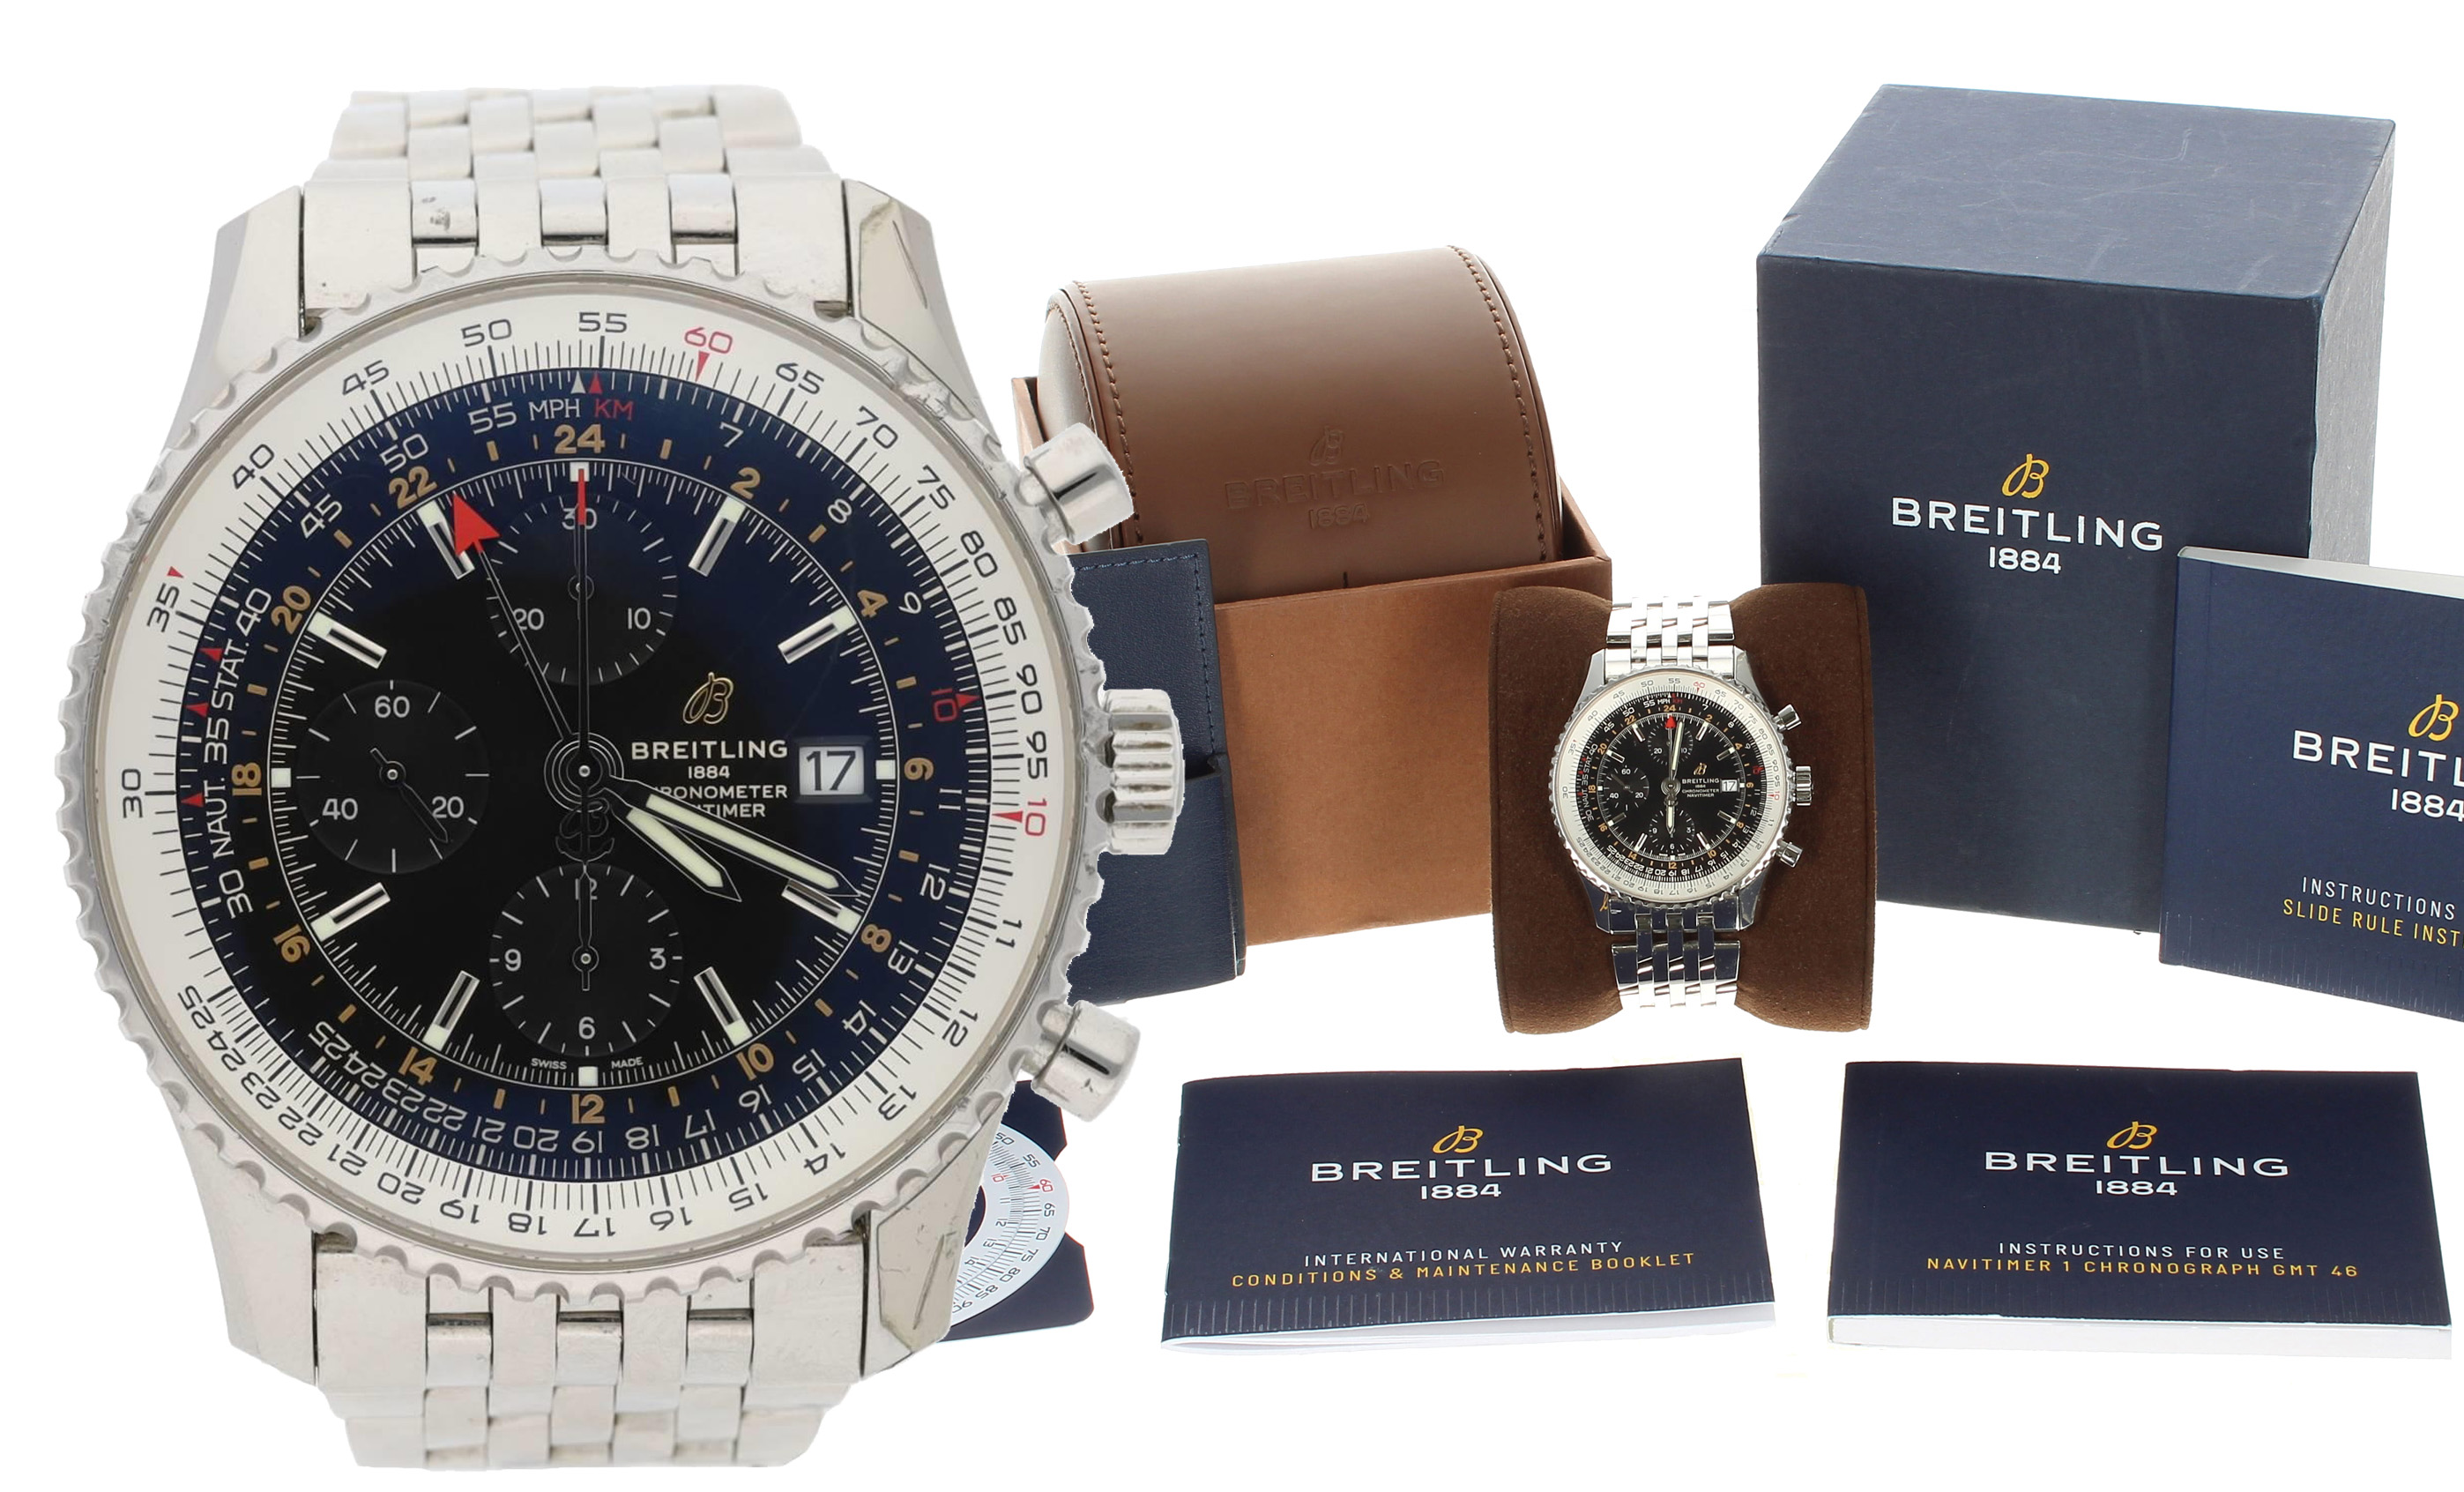 Breitling Navitimer Chronograph GMT 46 automatic stainless steel gentleman's wristwatch, reference